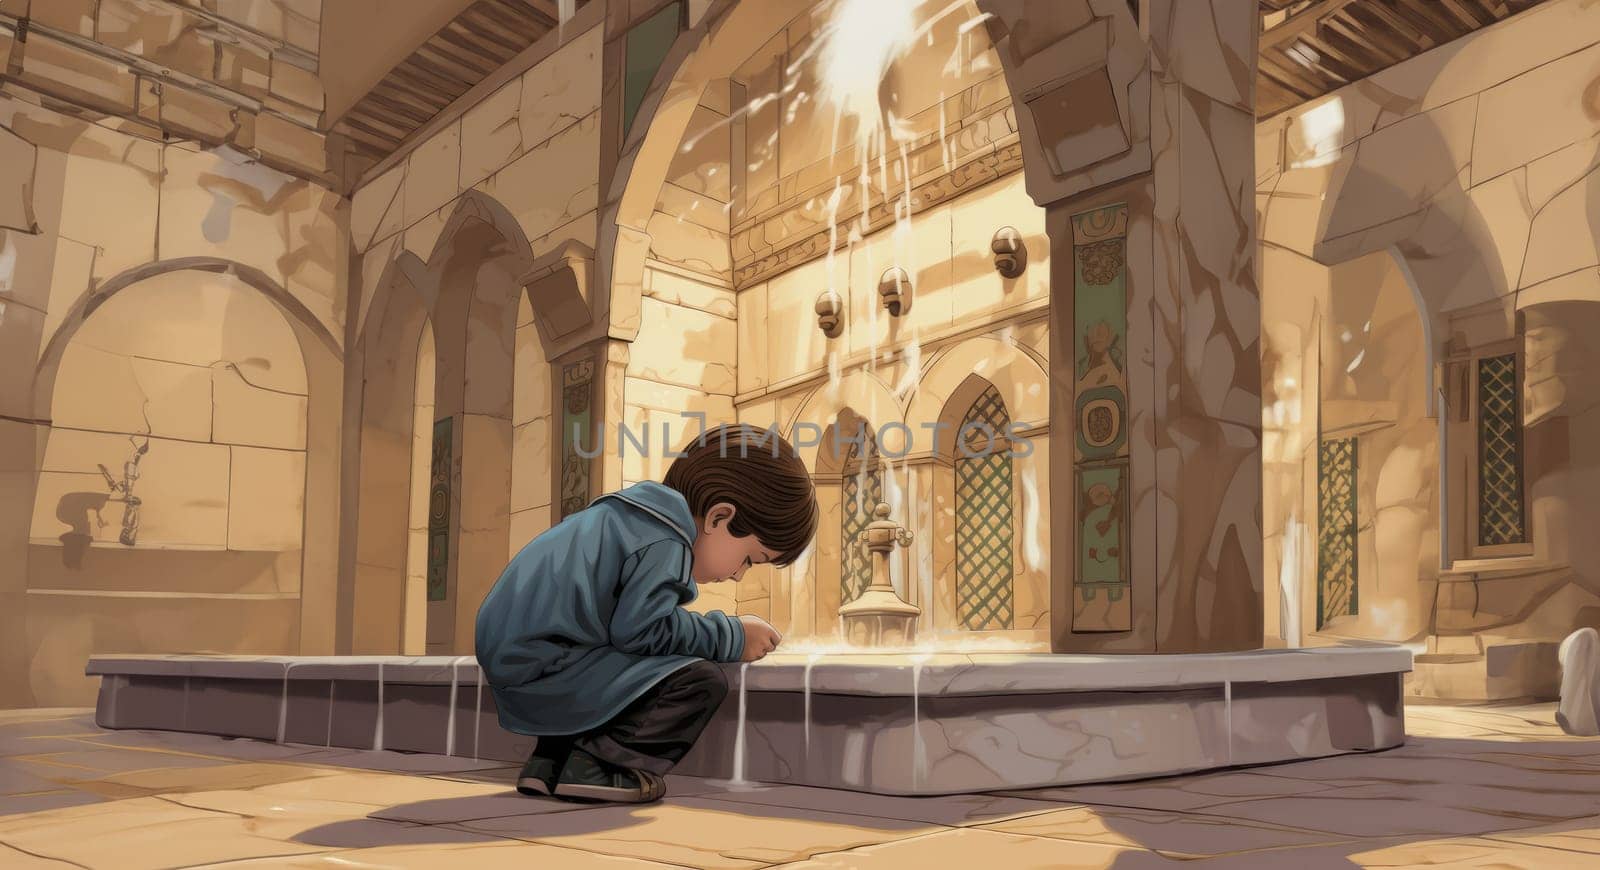 A young boy engages in the Islamic ritual of "abdest," cleansing and purifying his body before prayer, embodying the spiritual traditions and cultural practices associated with Islamic worship.Generated image. by dotshock